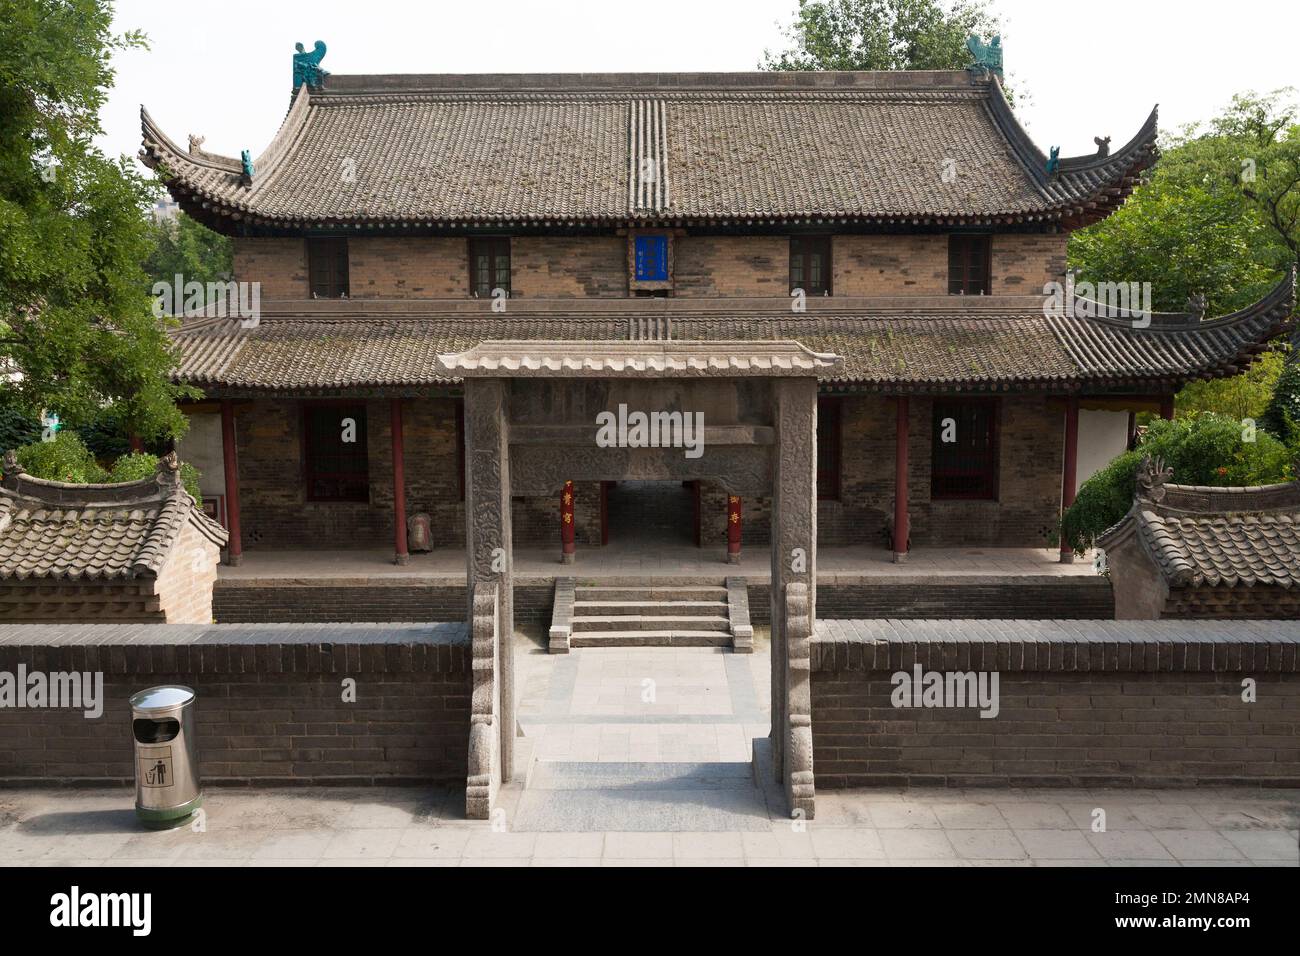 Chinese pagoda style hall building with rising roof eaves, situated in the grounds Jianfu temple, close to the Small Wild Goose Pagoda AKA Little Wild Goose Pagoda, Xi'an, PRC, China. (125) Stock Photo